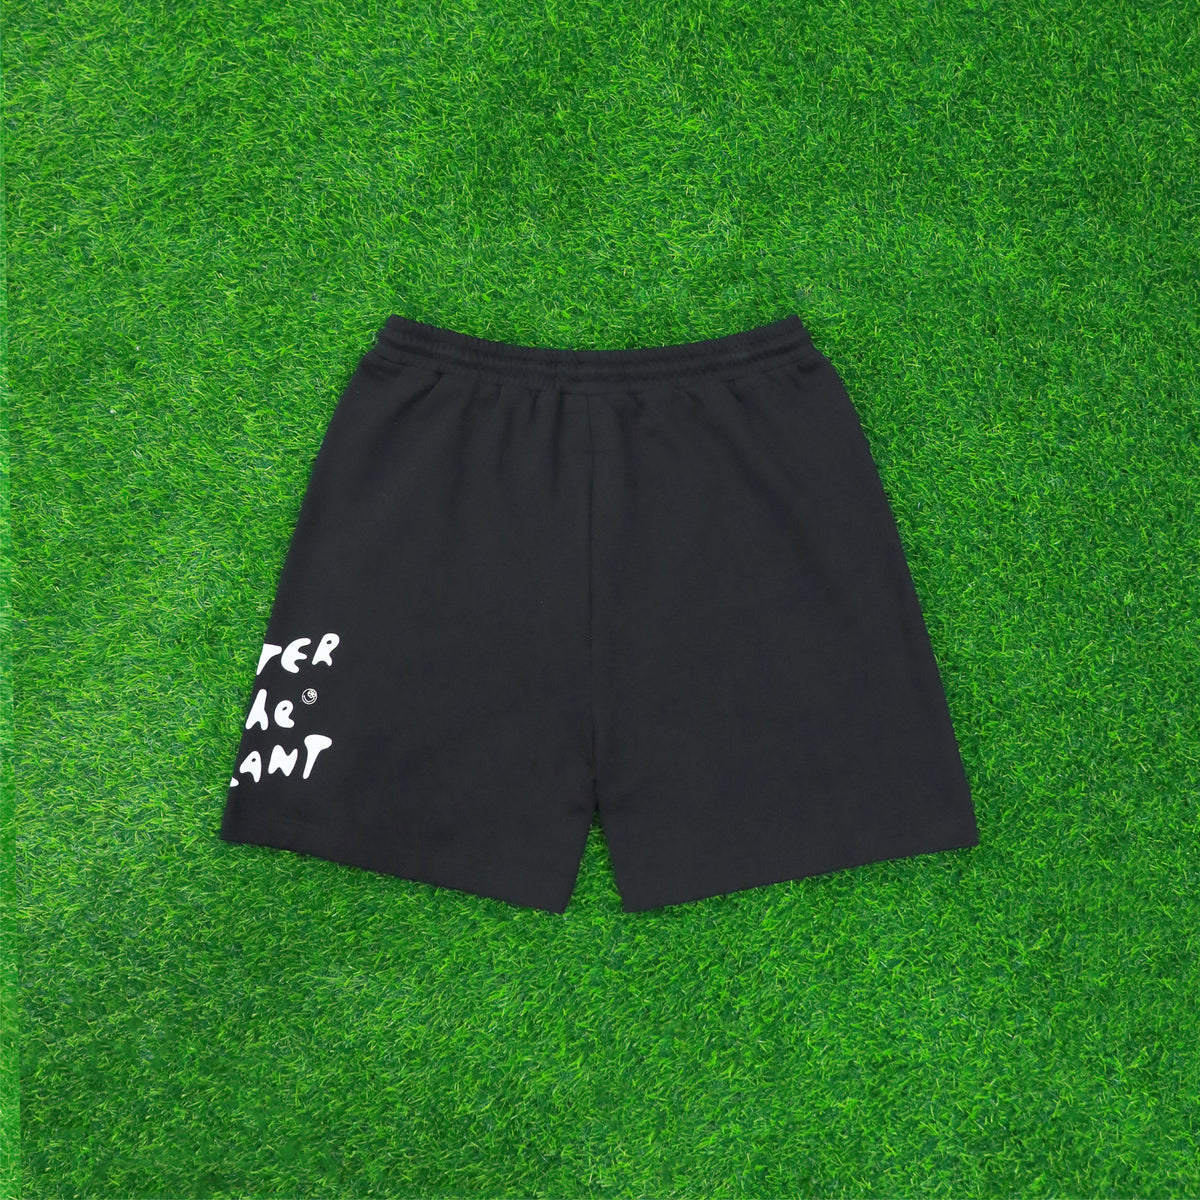 SUMMER SHORTS | BLACK, Elasticated and Drawstring, Waist 2 Side Pockets, Printed Branding, Woven Brand Patch, Collaboration with Smiley, Color: Black, Material: 100% Cotton